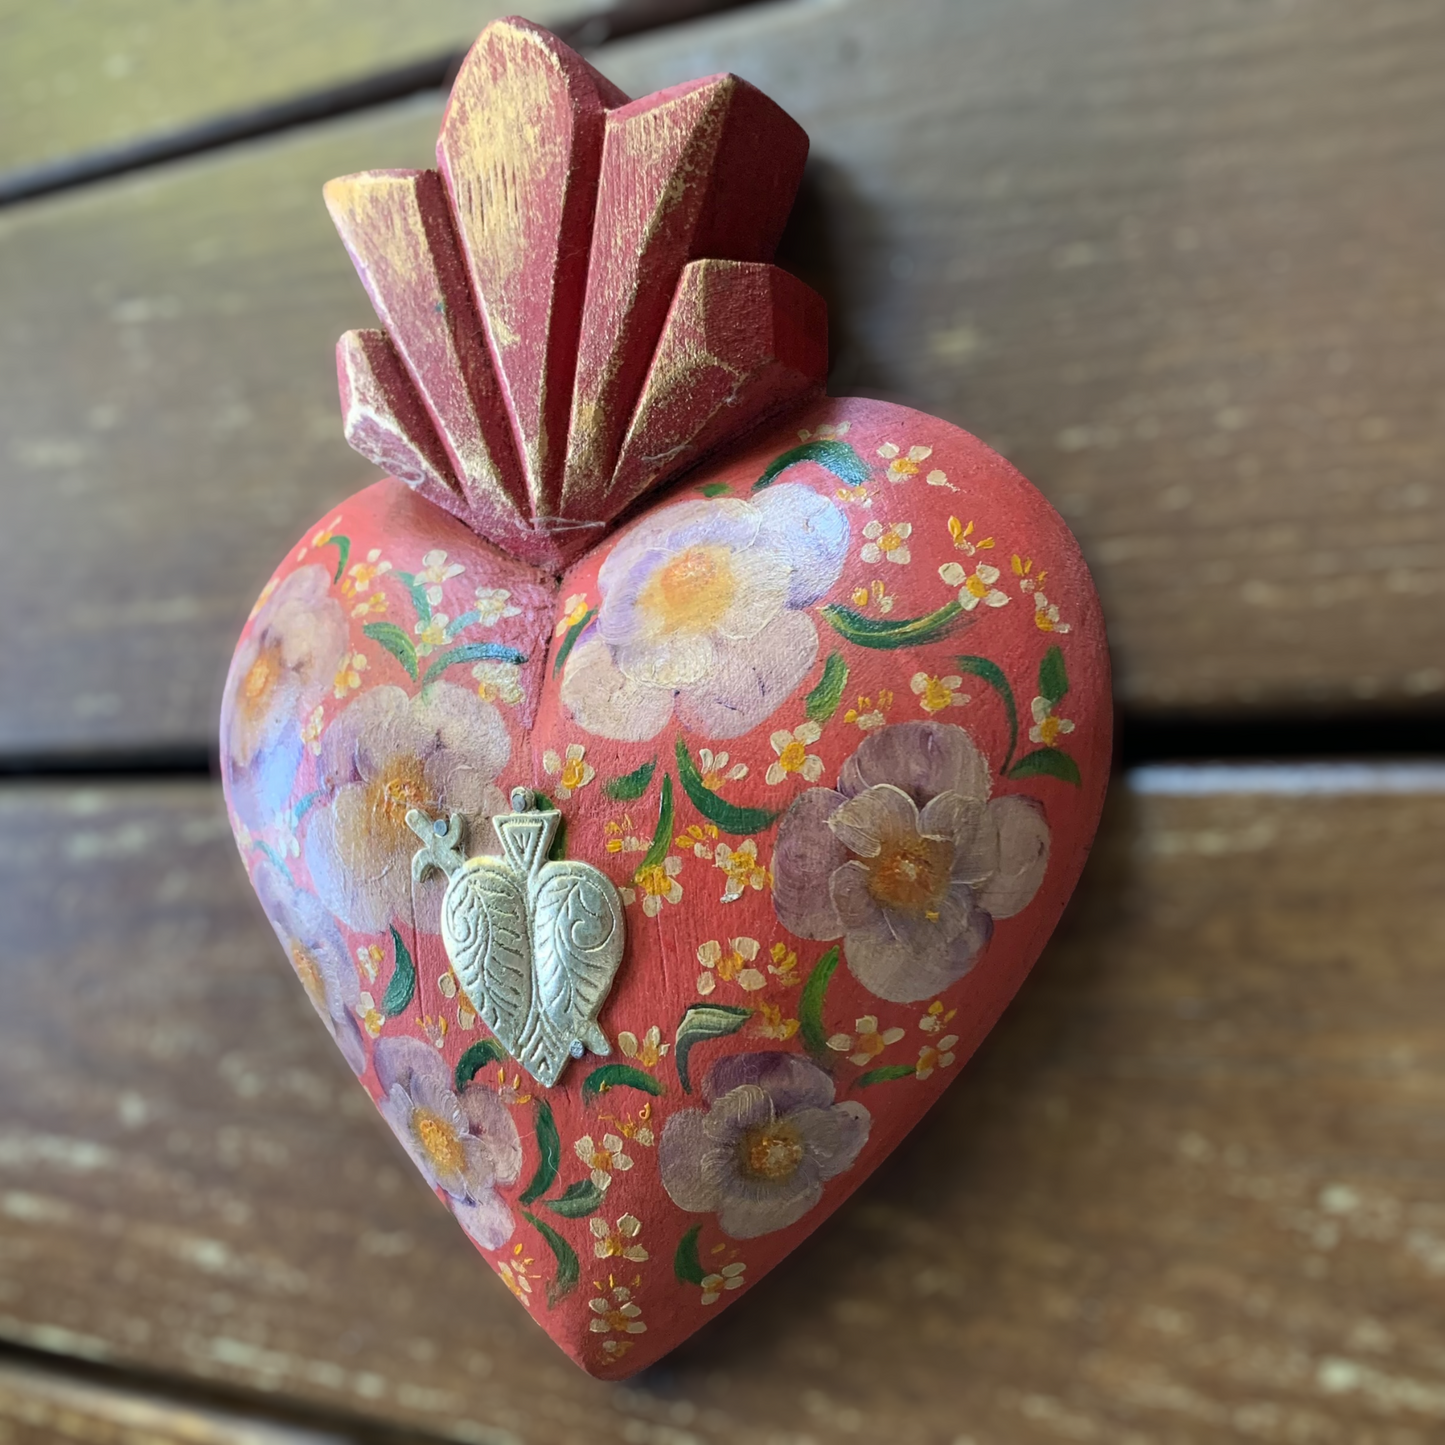 Mexican Wood Folk Art painted Heart with Milagros Charm